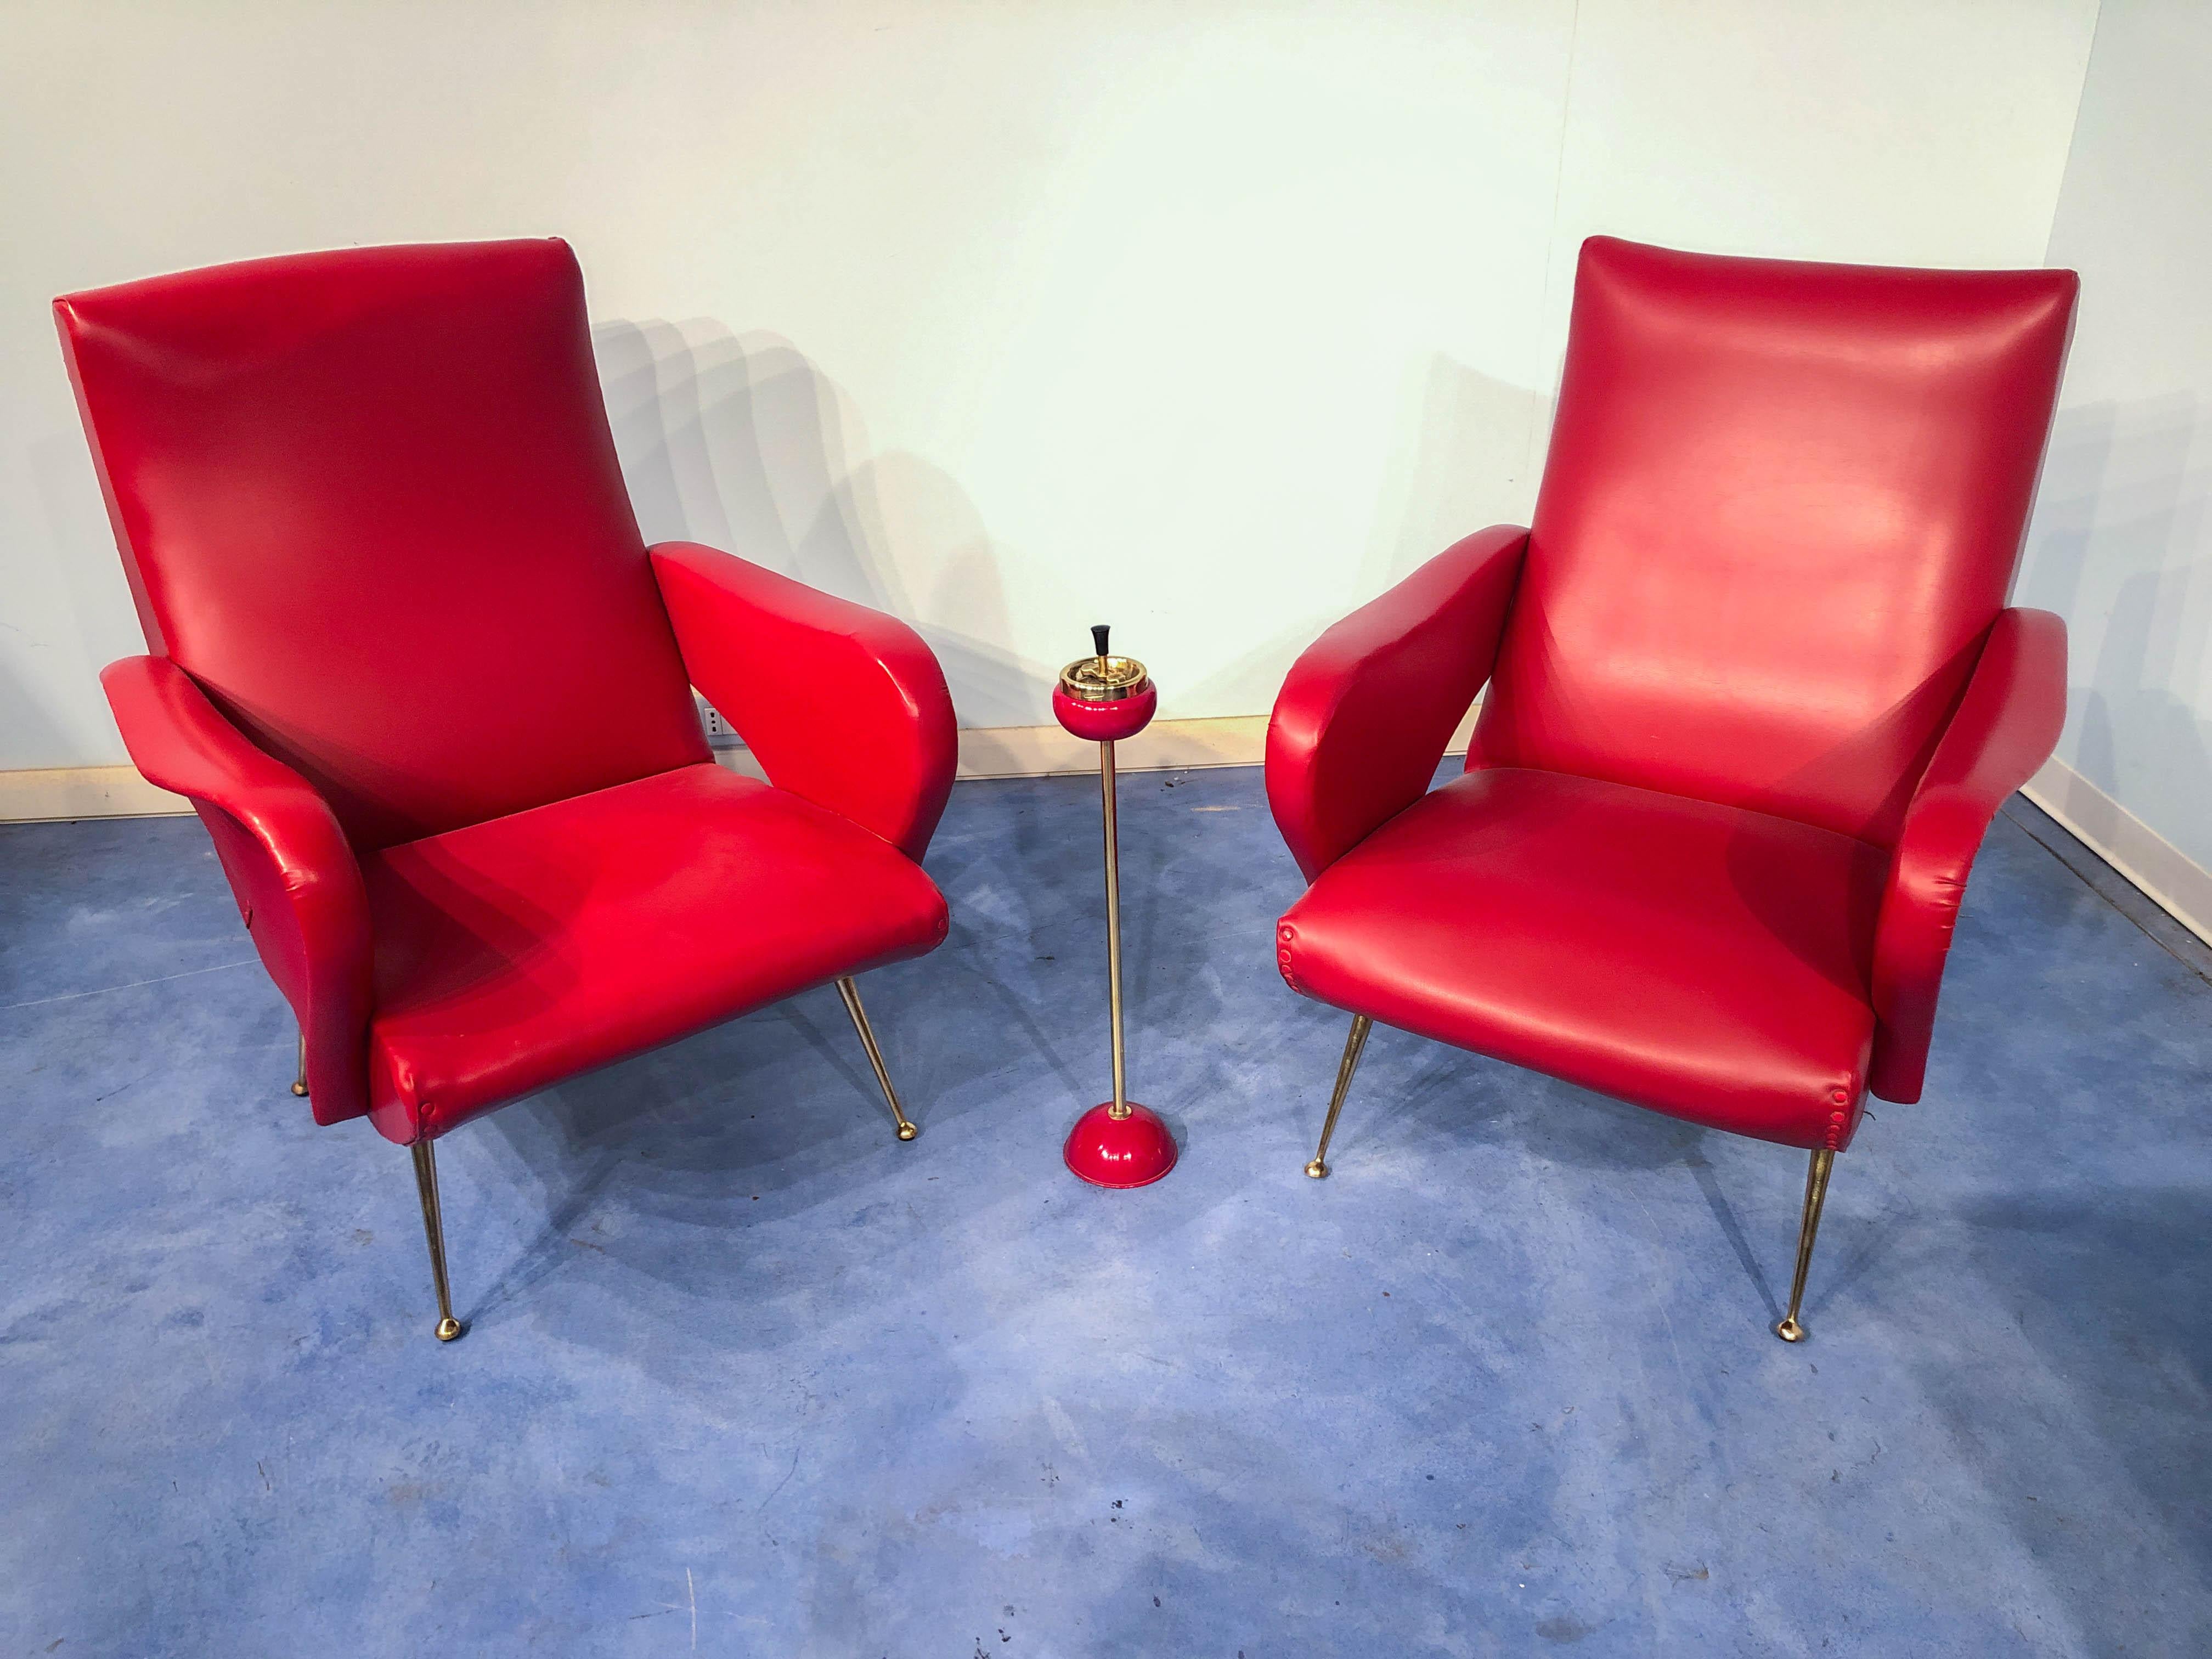 A pair of stylish and comfortable Italian Mid-Century Modern red vinyl armchairs or club chairs in Nino Zoncada Style, 1950.
In very good vintage condition, polished the brass feet and cleaned the surface. 
As you can see from the pictures it also